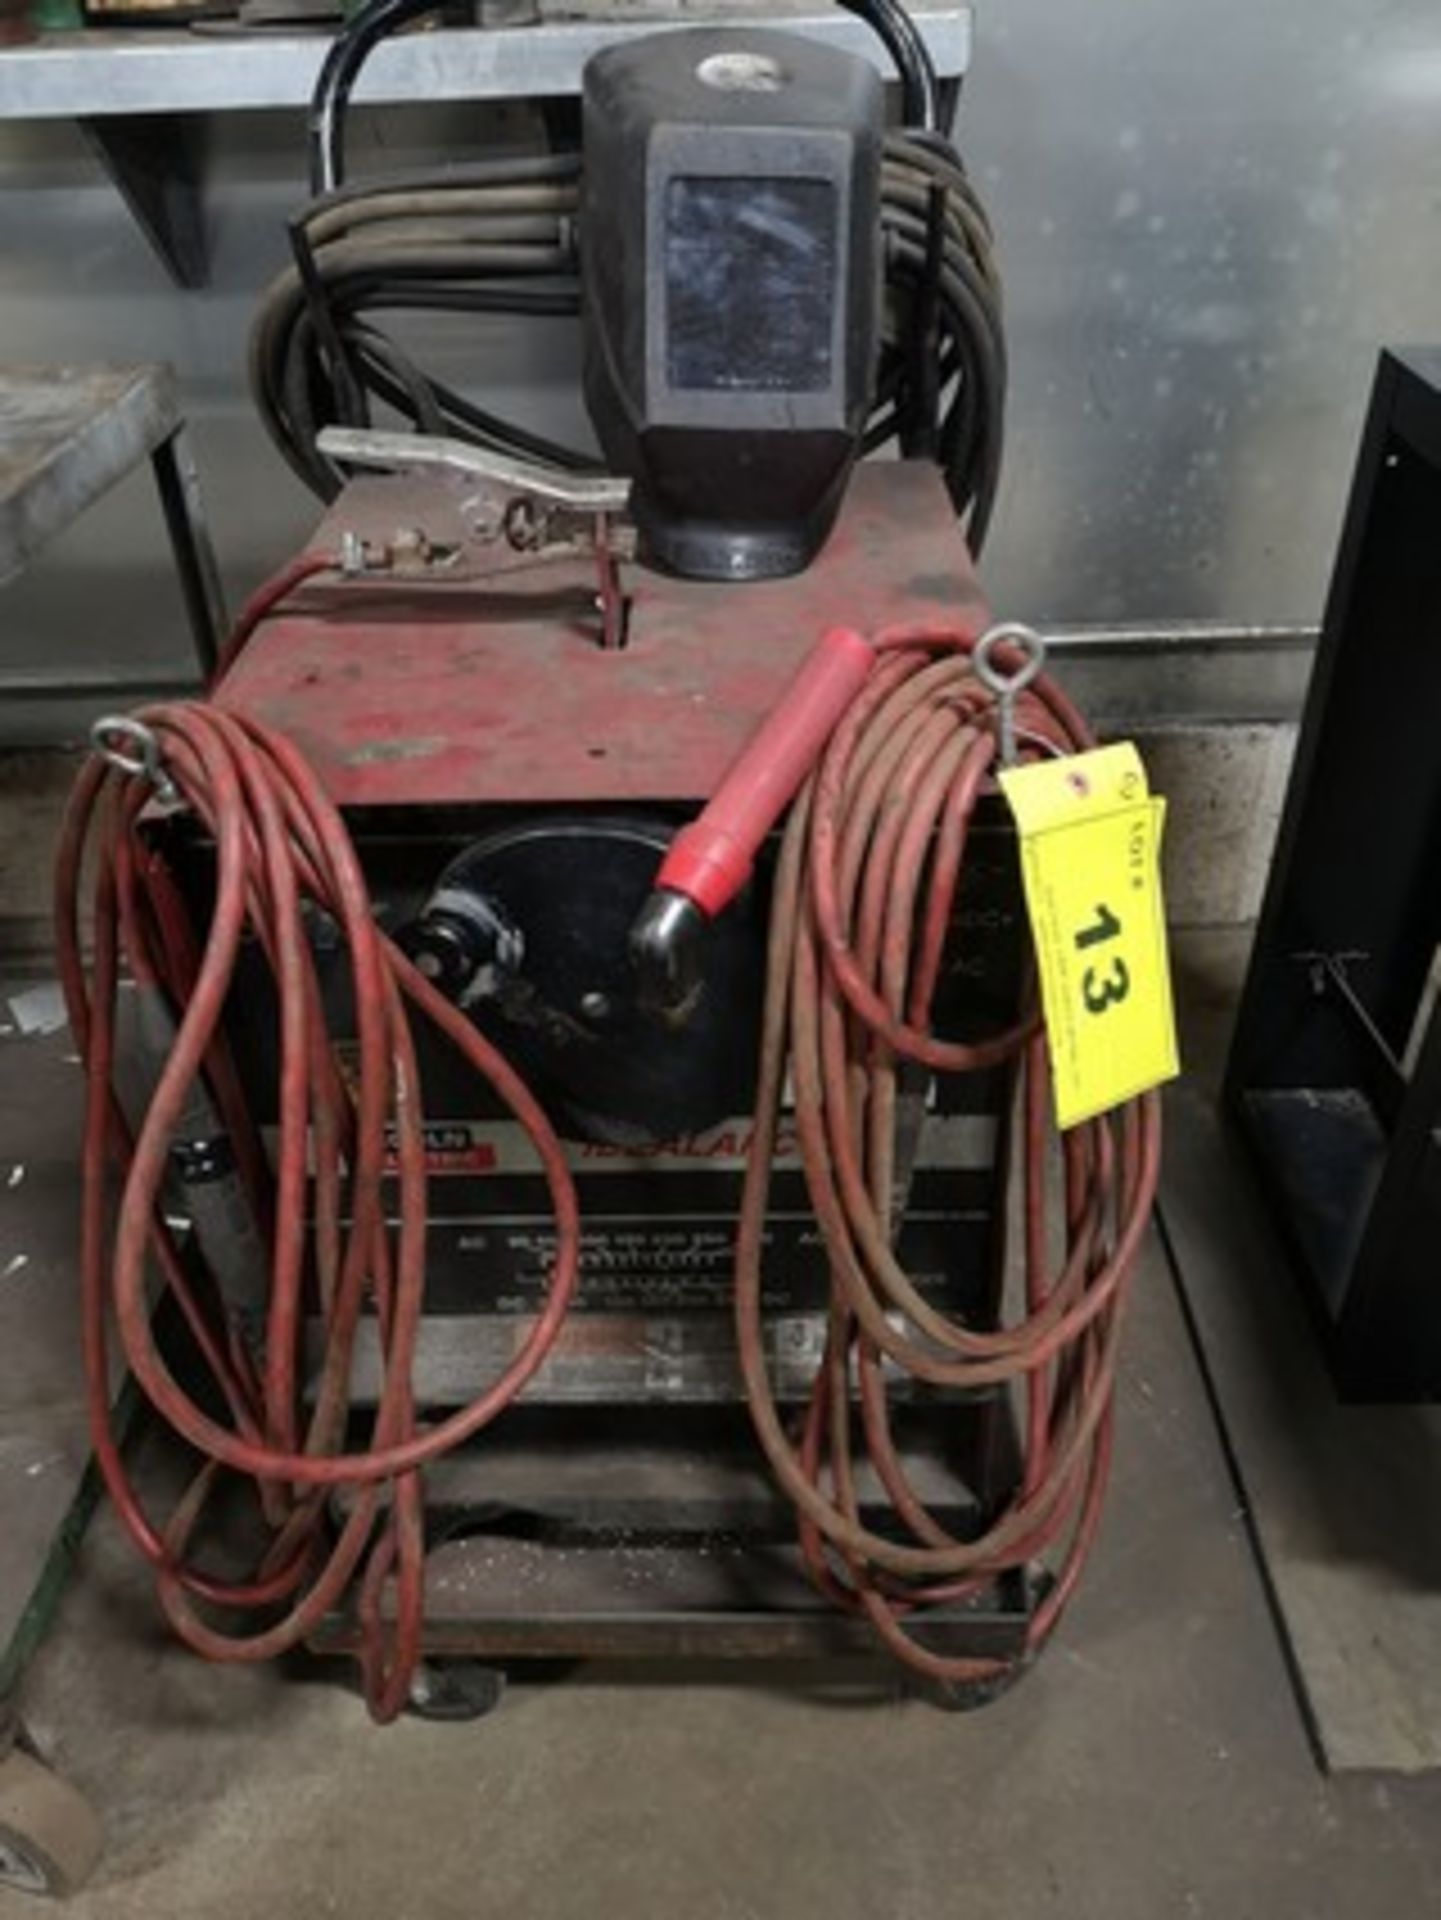 LINCOLN ELECTRIC IDEALARC 250 AC/DC ARC WELDER, S/N C1950300331 W/ WELDING MASK - Image 2 of 4